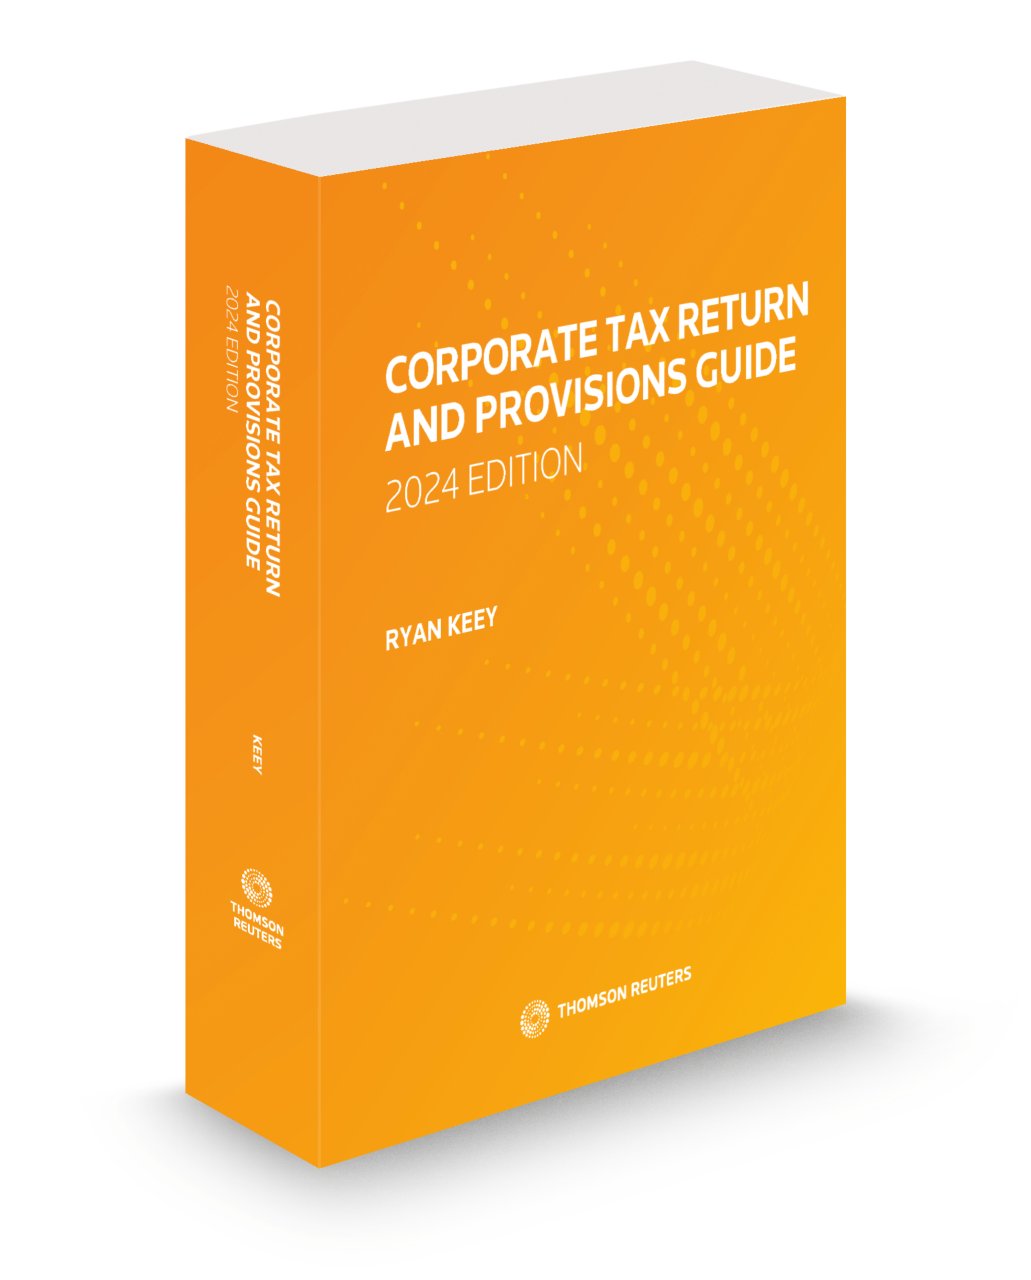 Corporate Tax Return and Provisions Guide, 2024 Edition